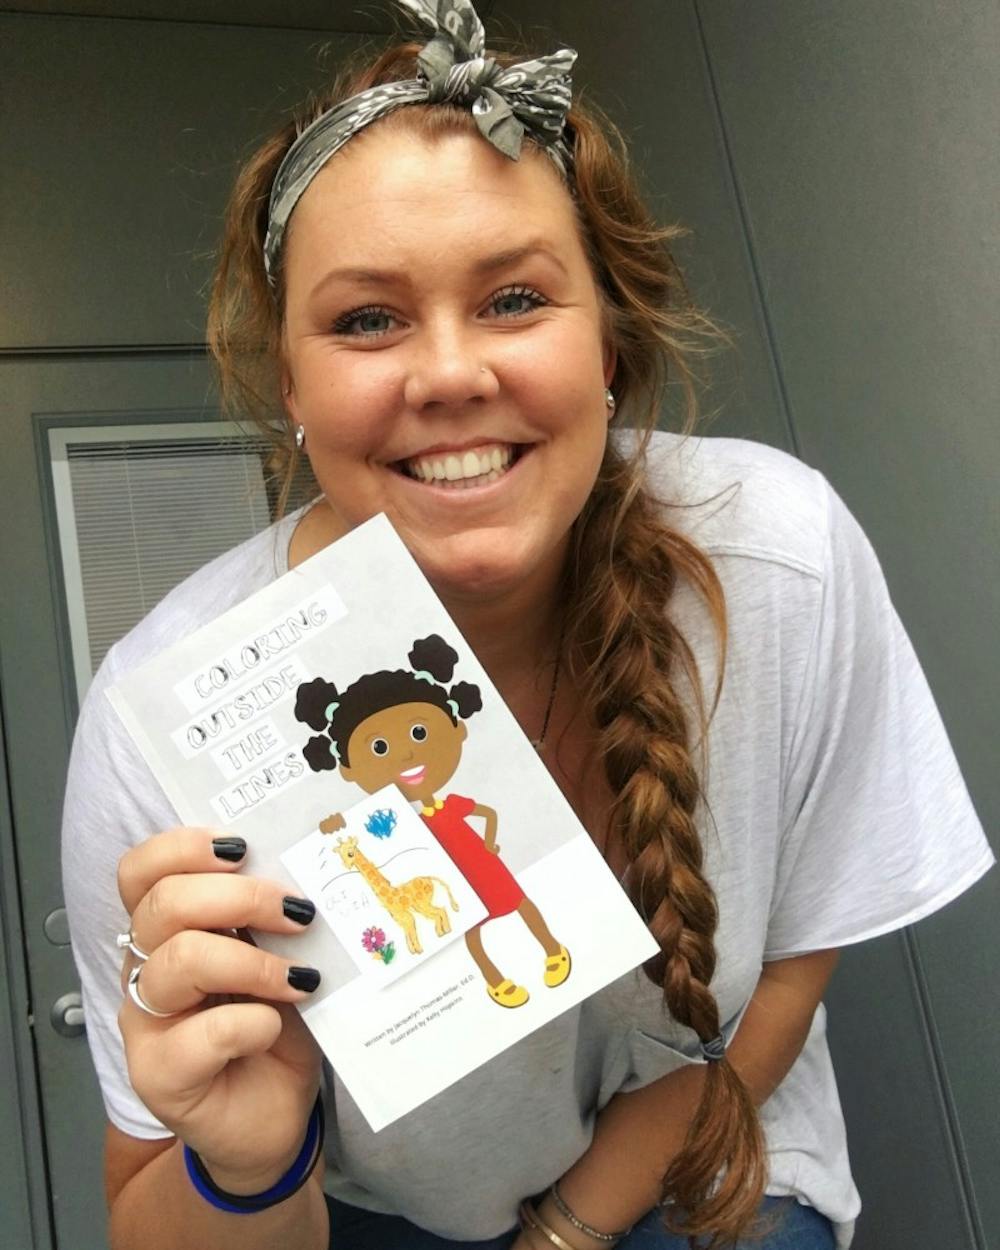 <p>Graduate student Kelly Hopkins illustrates children's books as a side job. Hopkins teamed up with her former&nbsp;high school vice principal,&nbsp;Jacquelyn Thomas-Miller, to write and illustrate their first picture book,&nbsp;“Coloring Outside the Lines.” <em>Kelly Hopkins // Photo Provided</em></p>